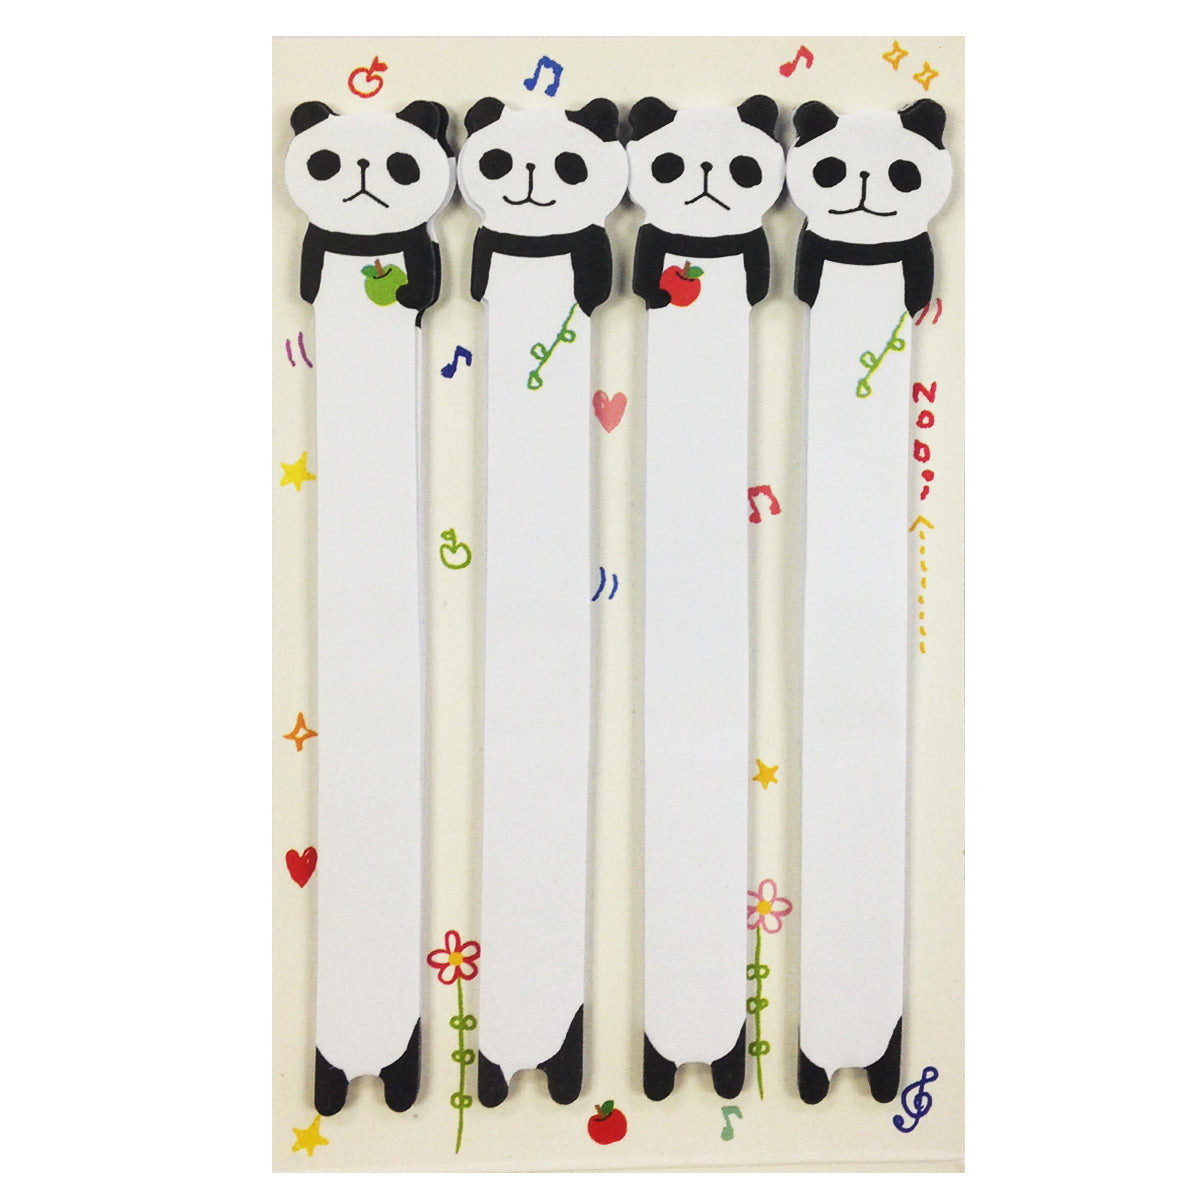 Wrapables Panda Bookmark Flag Index Tab Sticky Notes